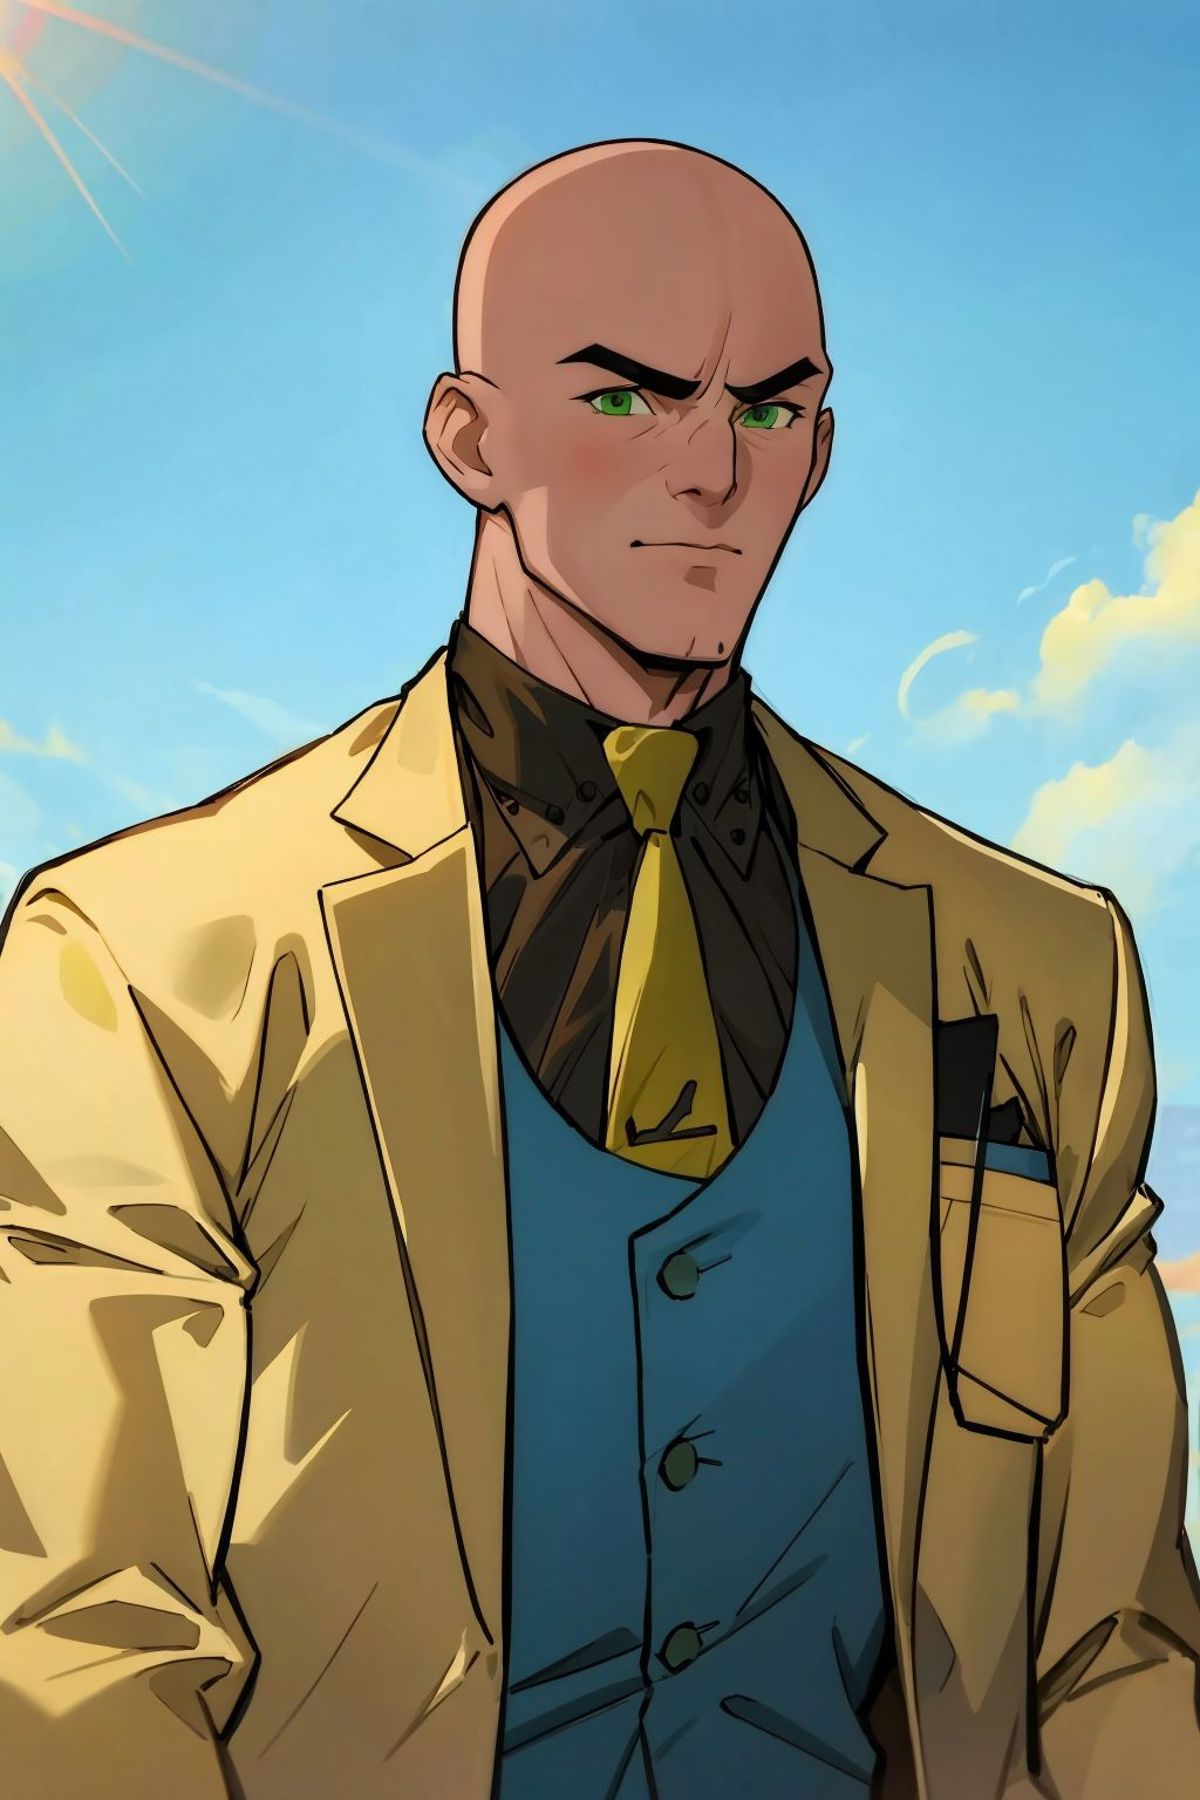 Lex Luthor - Tomorrowverse (DC Comics) image by Montitto